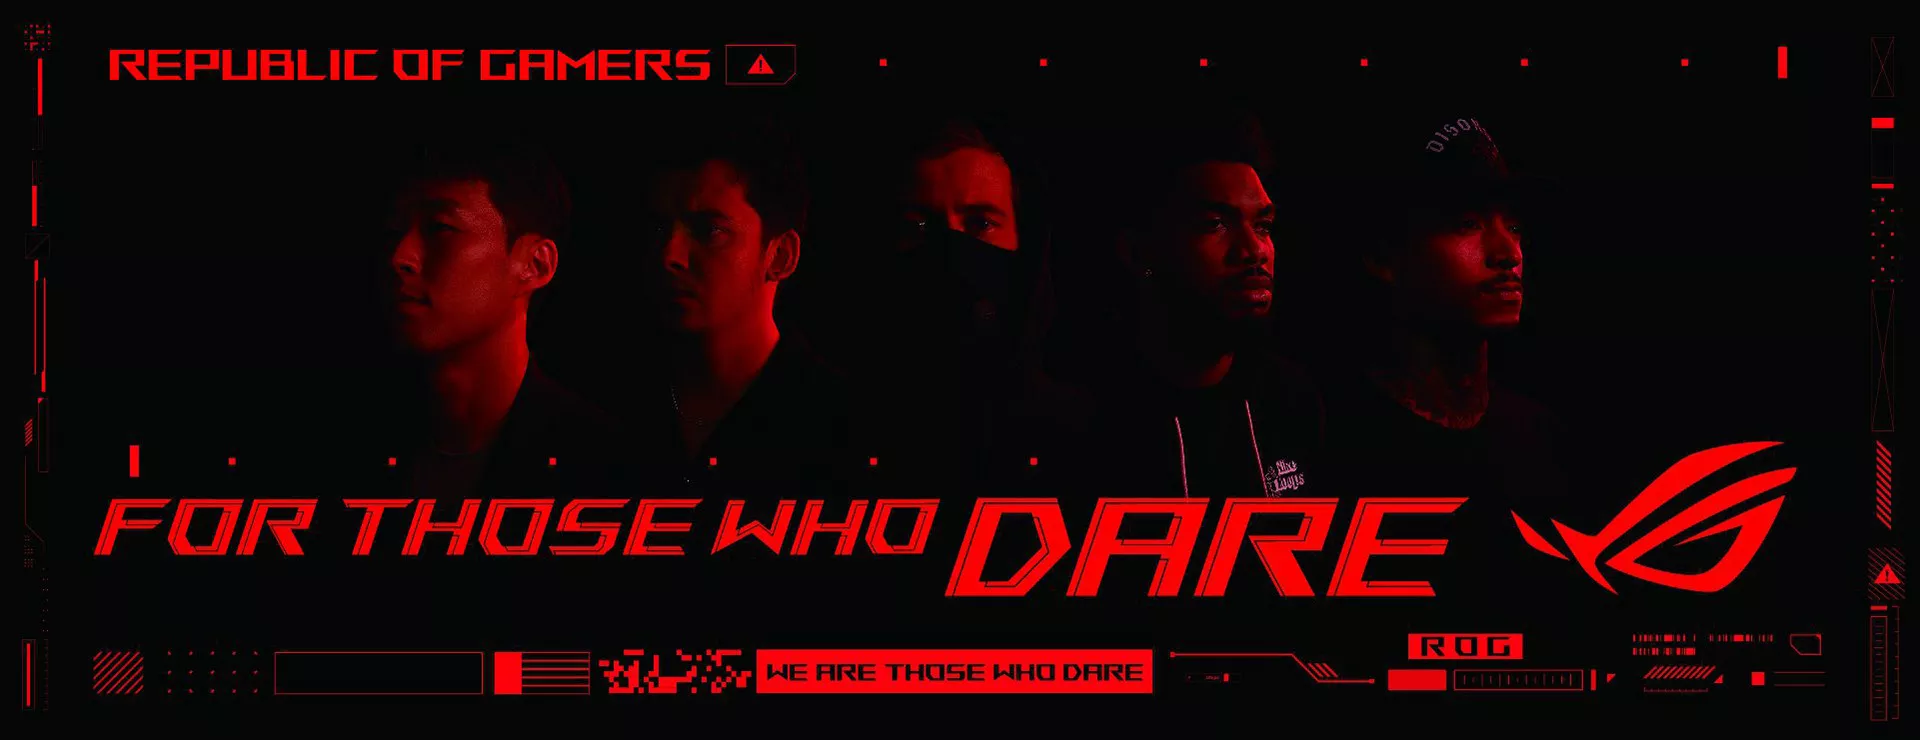 We Are Those Who Dare For Those Who Dare Republic of Gamers